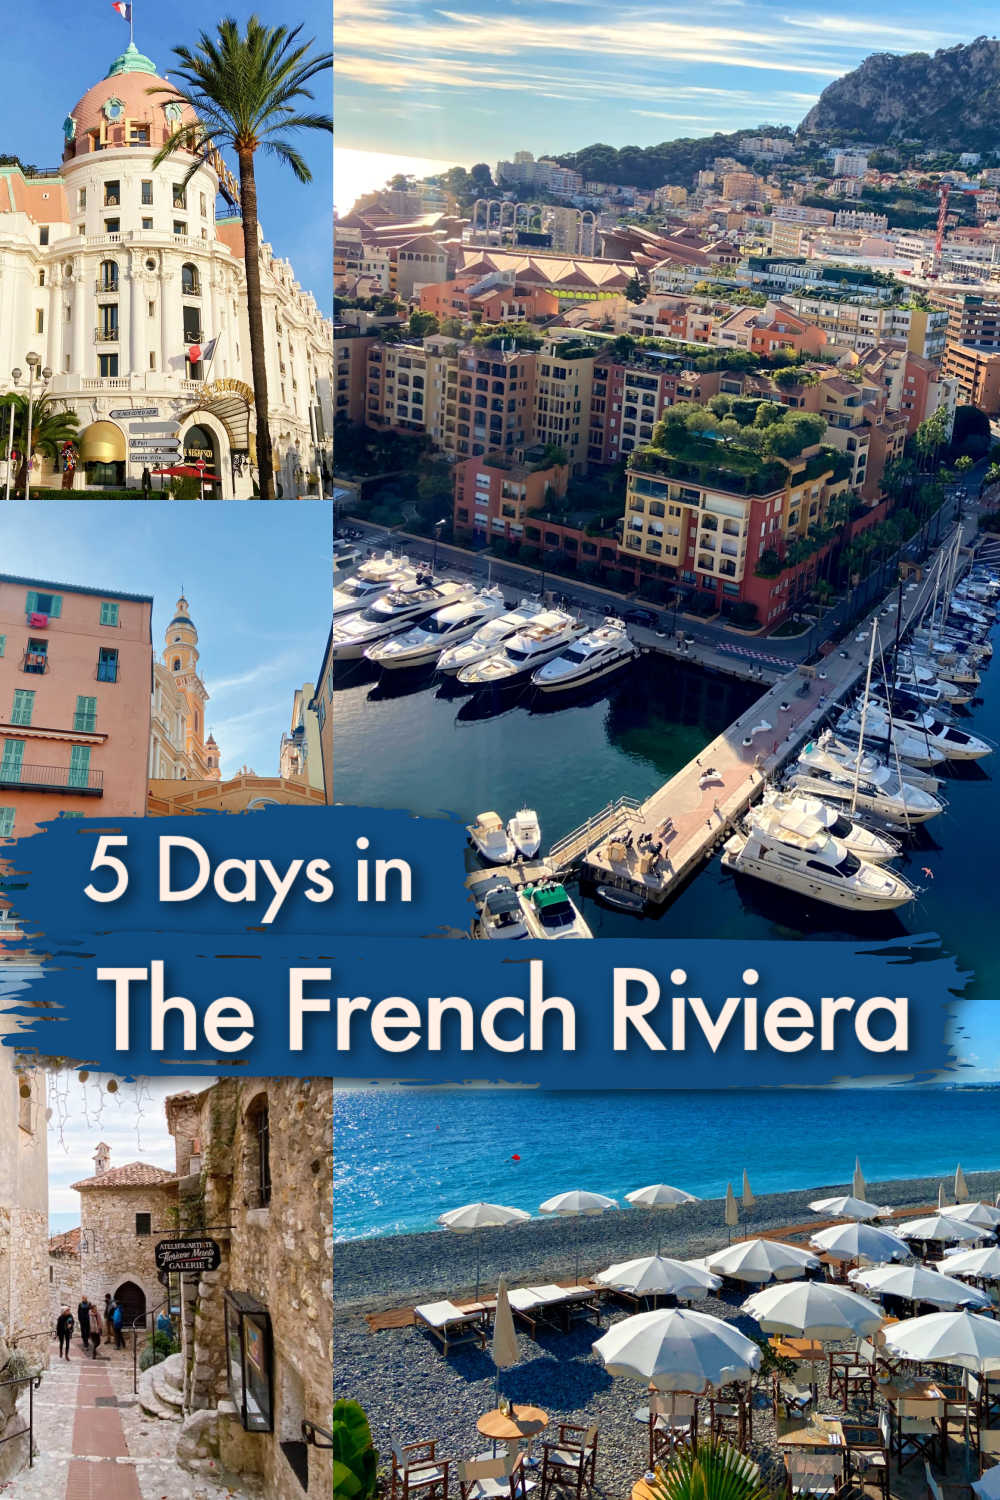 Here is your perfect 5-Day French Riviera itinerary. The best cities and beaches in the French Riviera, where to stay, and how to get around the French Riviera. Plus, the best time to travel to the French Riviera, international events, weather, tours and activities you can do in this beautiful part of South France. 